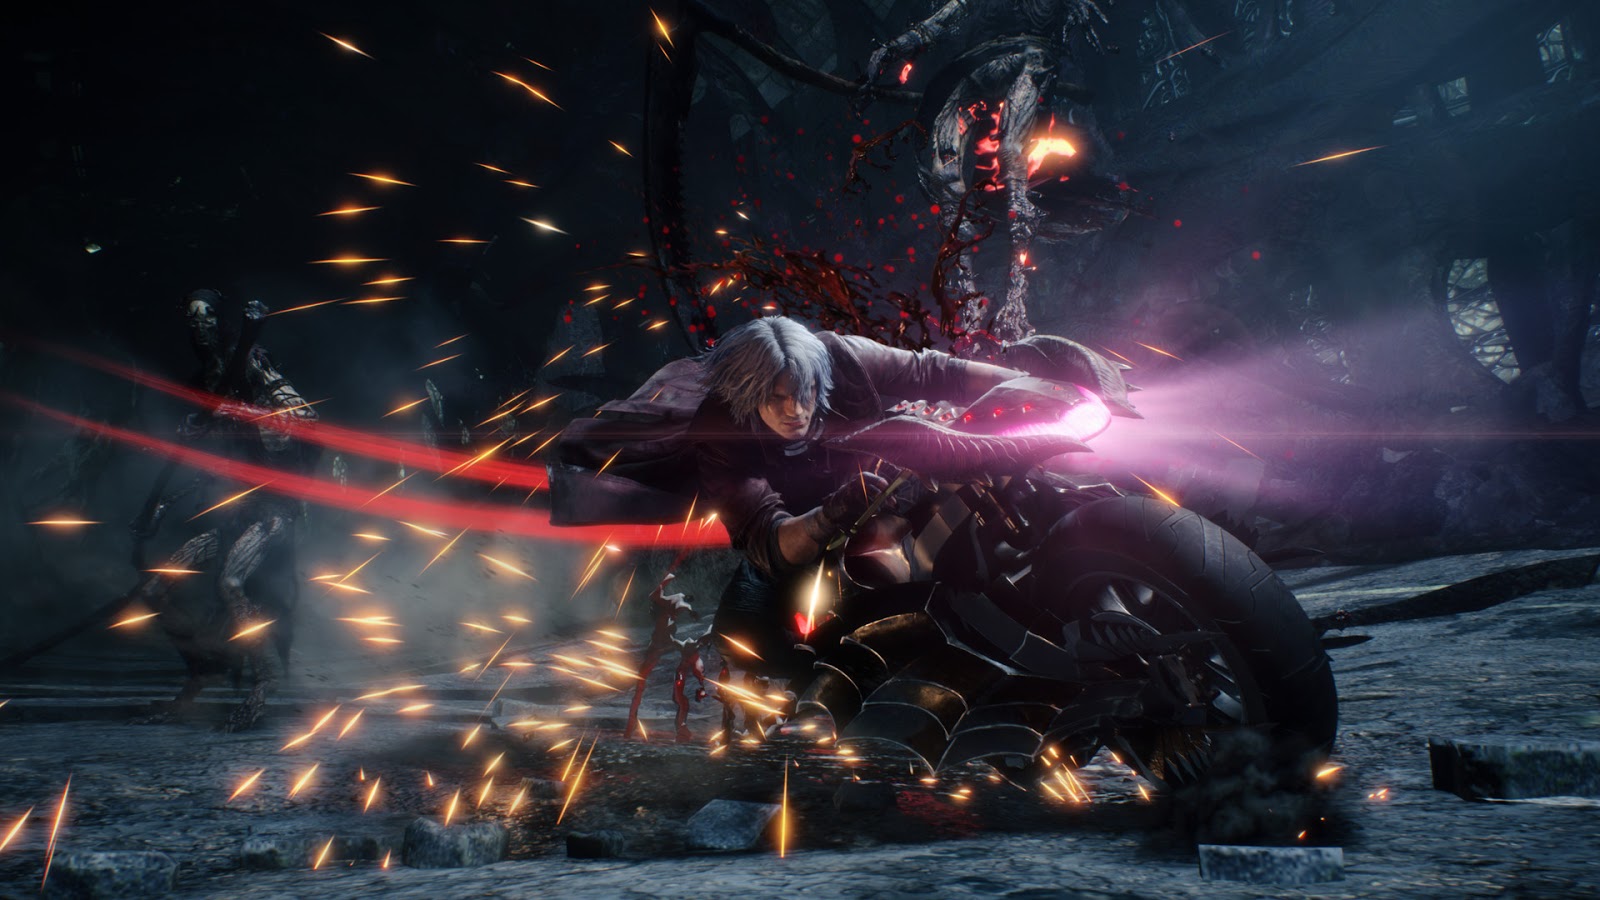 Devil May Cry 5 Deluxe Edition + All DLCs [Download PC Game  2019] (100% Working)